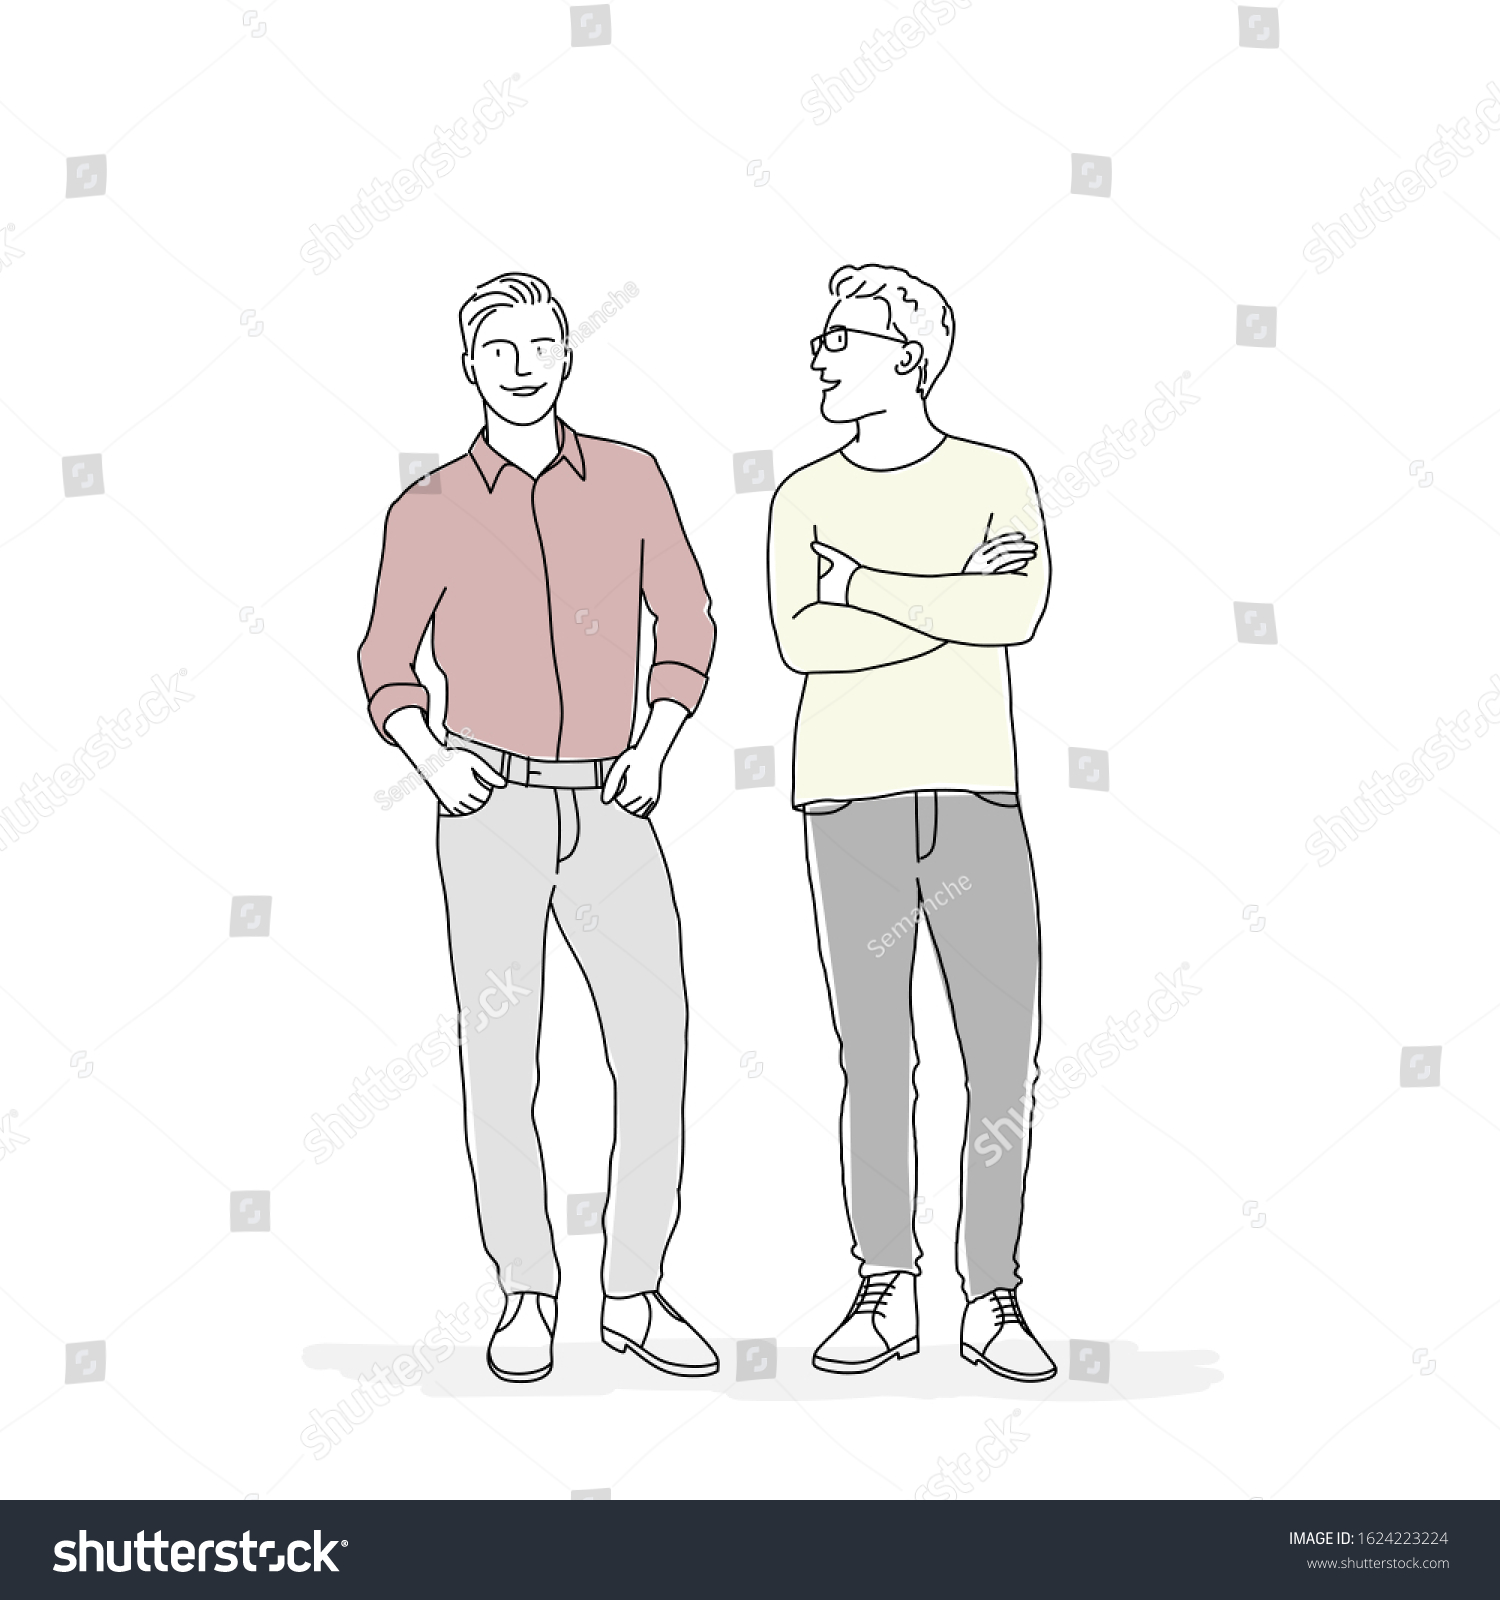 Sketch People Standing Next Each Other Stock Vector Royalty Free 1624223224 